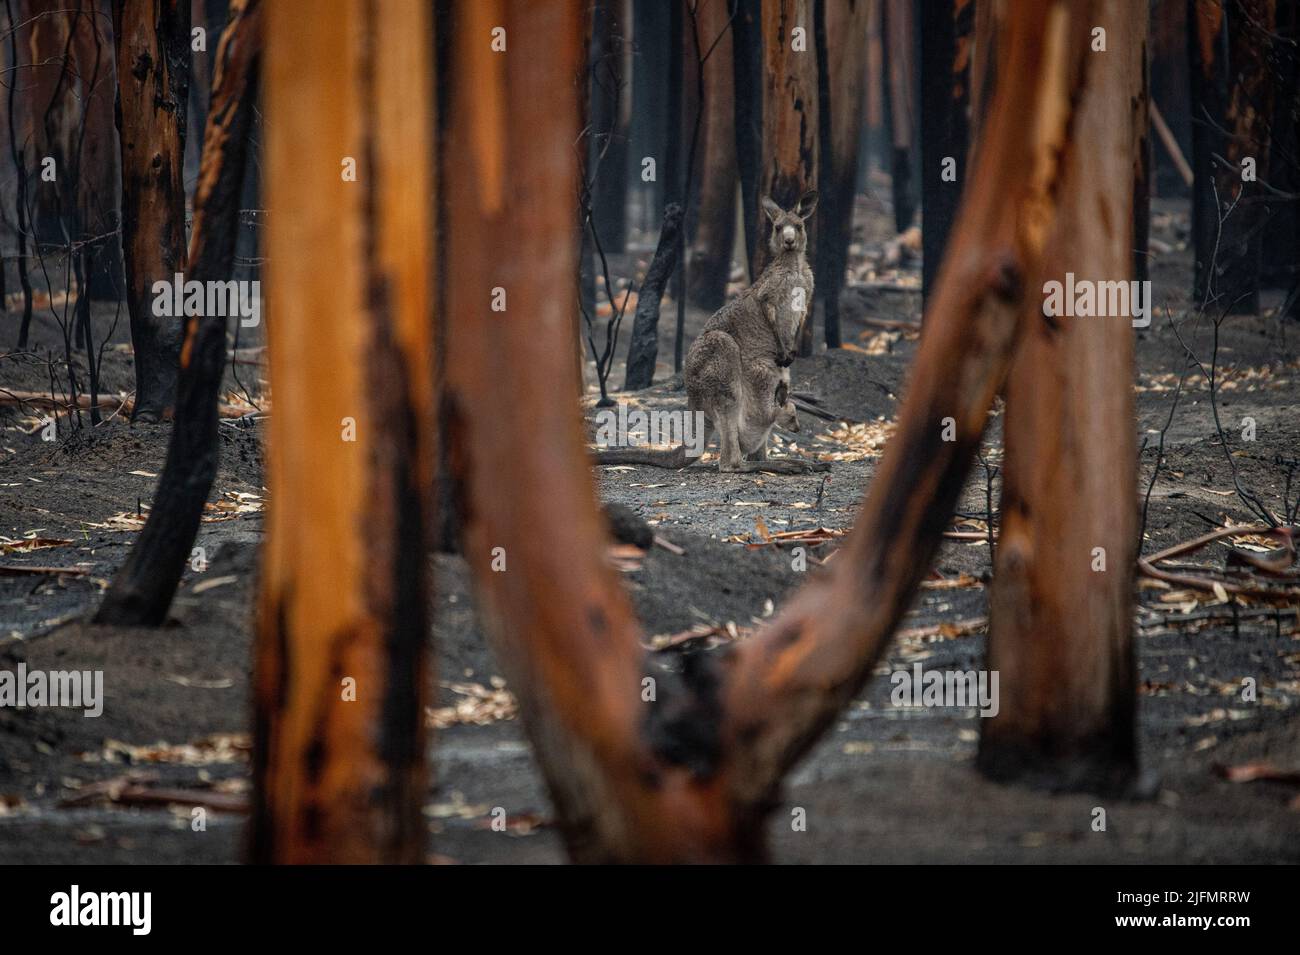 (220704) -- CANBERRA, July 4, 2022 (Xinhua) -- Photo provided by the Commonwealth Scientific and Industrial Research Organisation (CSIRO) on July 1, 2022 shows a kangaroo after a bushfire in Australia.  The number of extreme fire weather days in Australia every year has increased significantly over the past 40 years, a study has found.    According to a report published by the CSIRO on July 1, the number of extreme bushfire weather days per year increased by 27, or 56 percent, between 1979 and 2019. (Jo-anne McArthur/Handout via Xinhua) Stock Photo